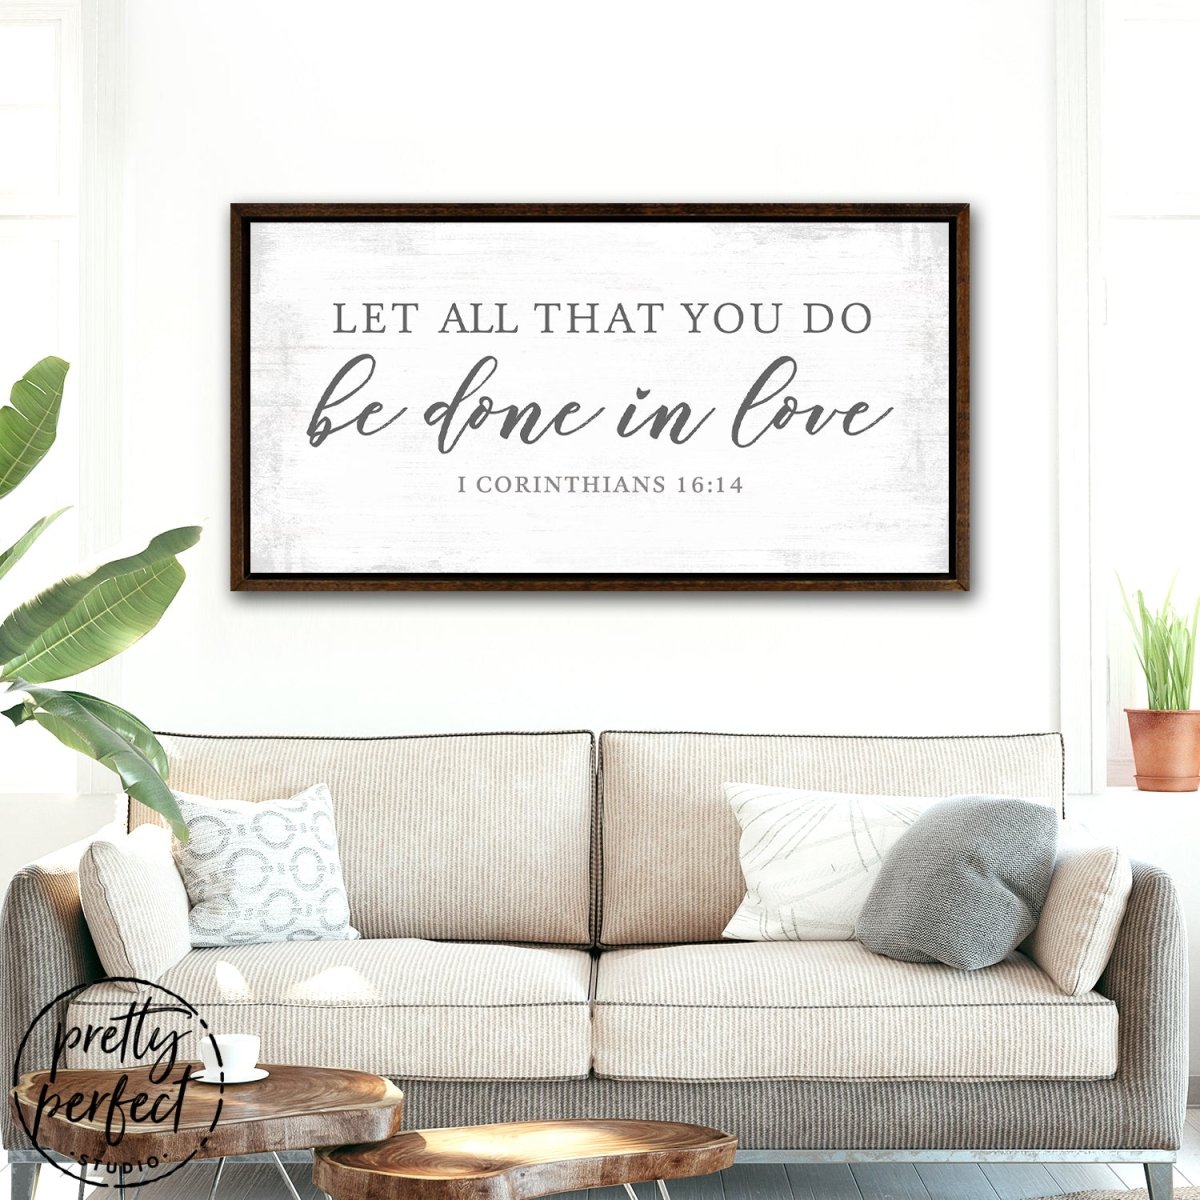 Let All That You Do Be Done In Love Sign Above Couch - Pretty Perfect Studio